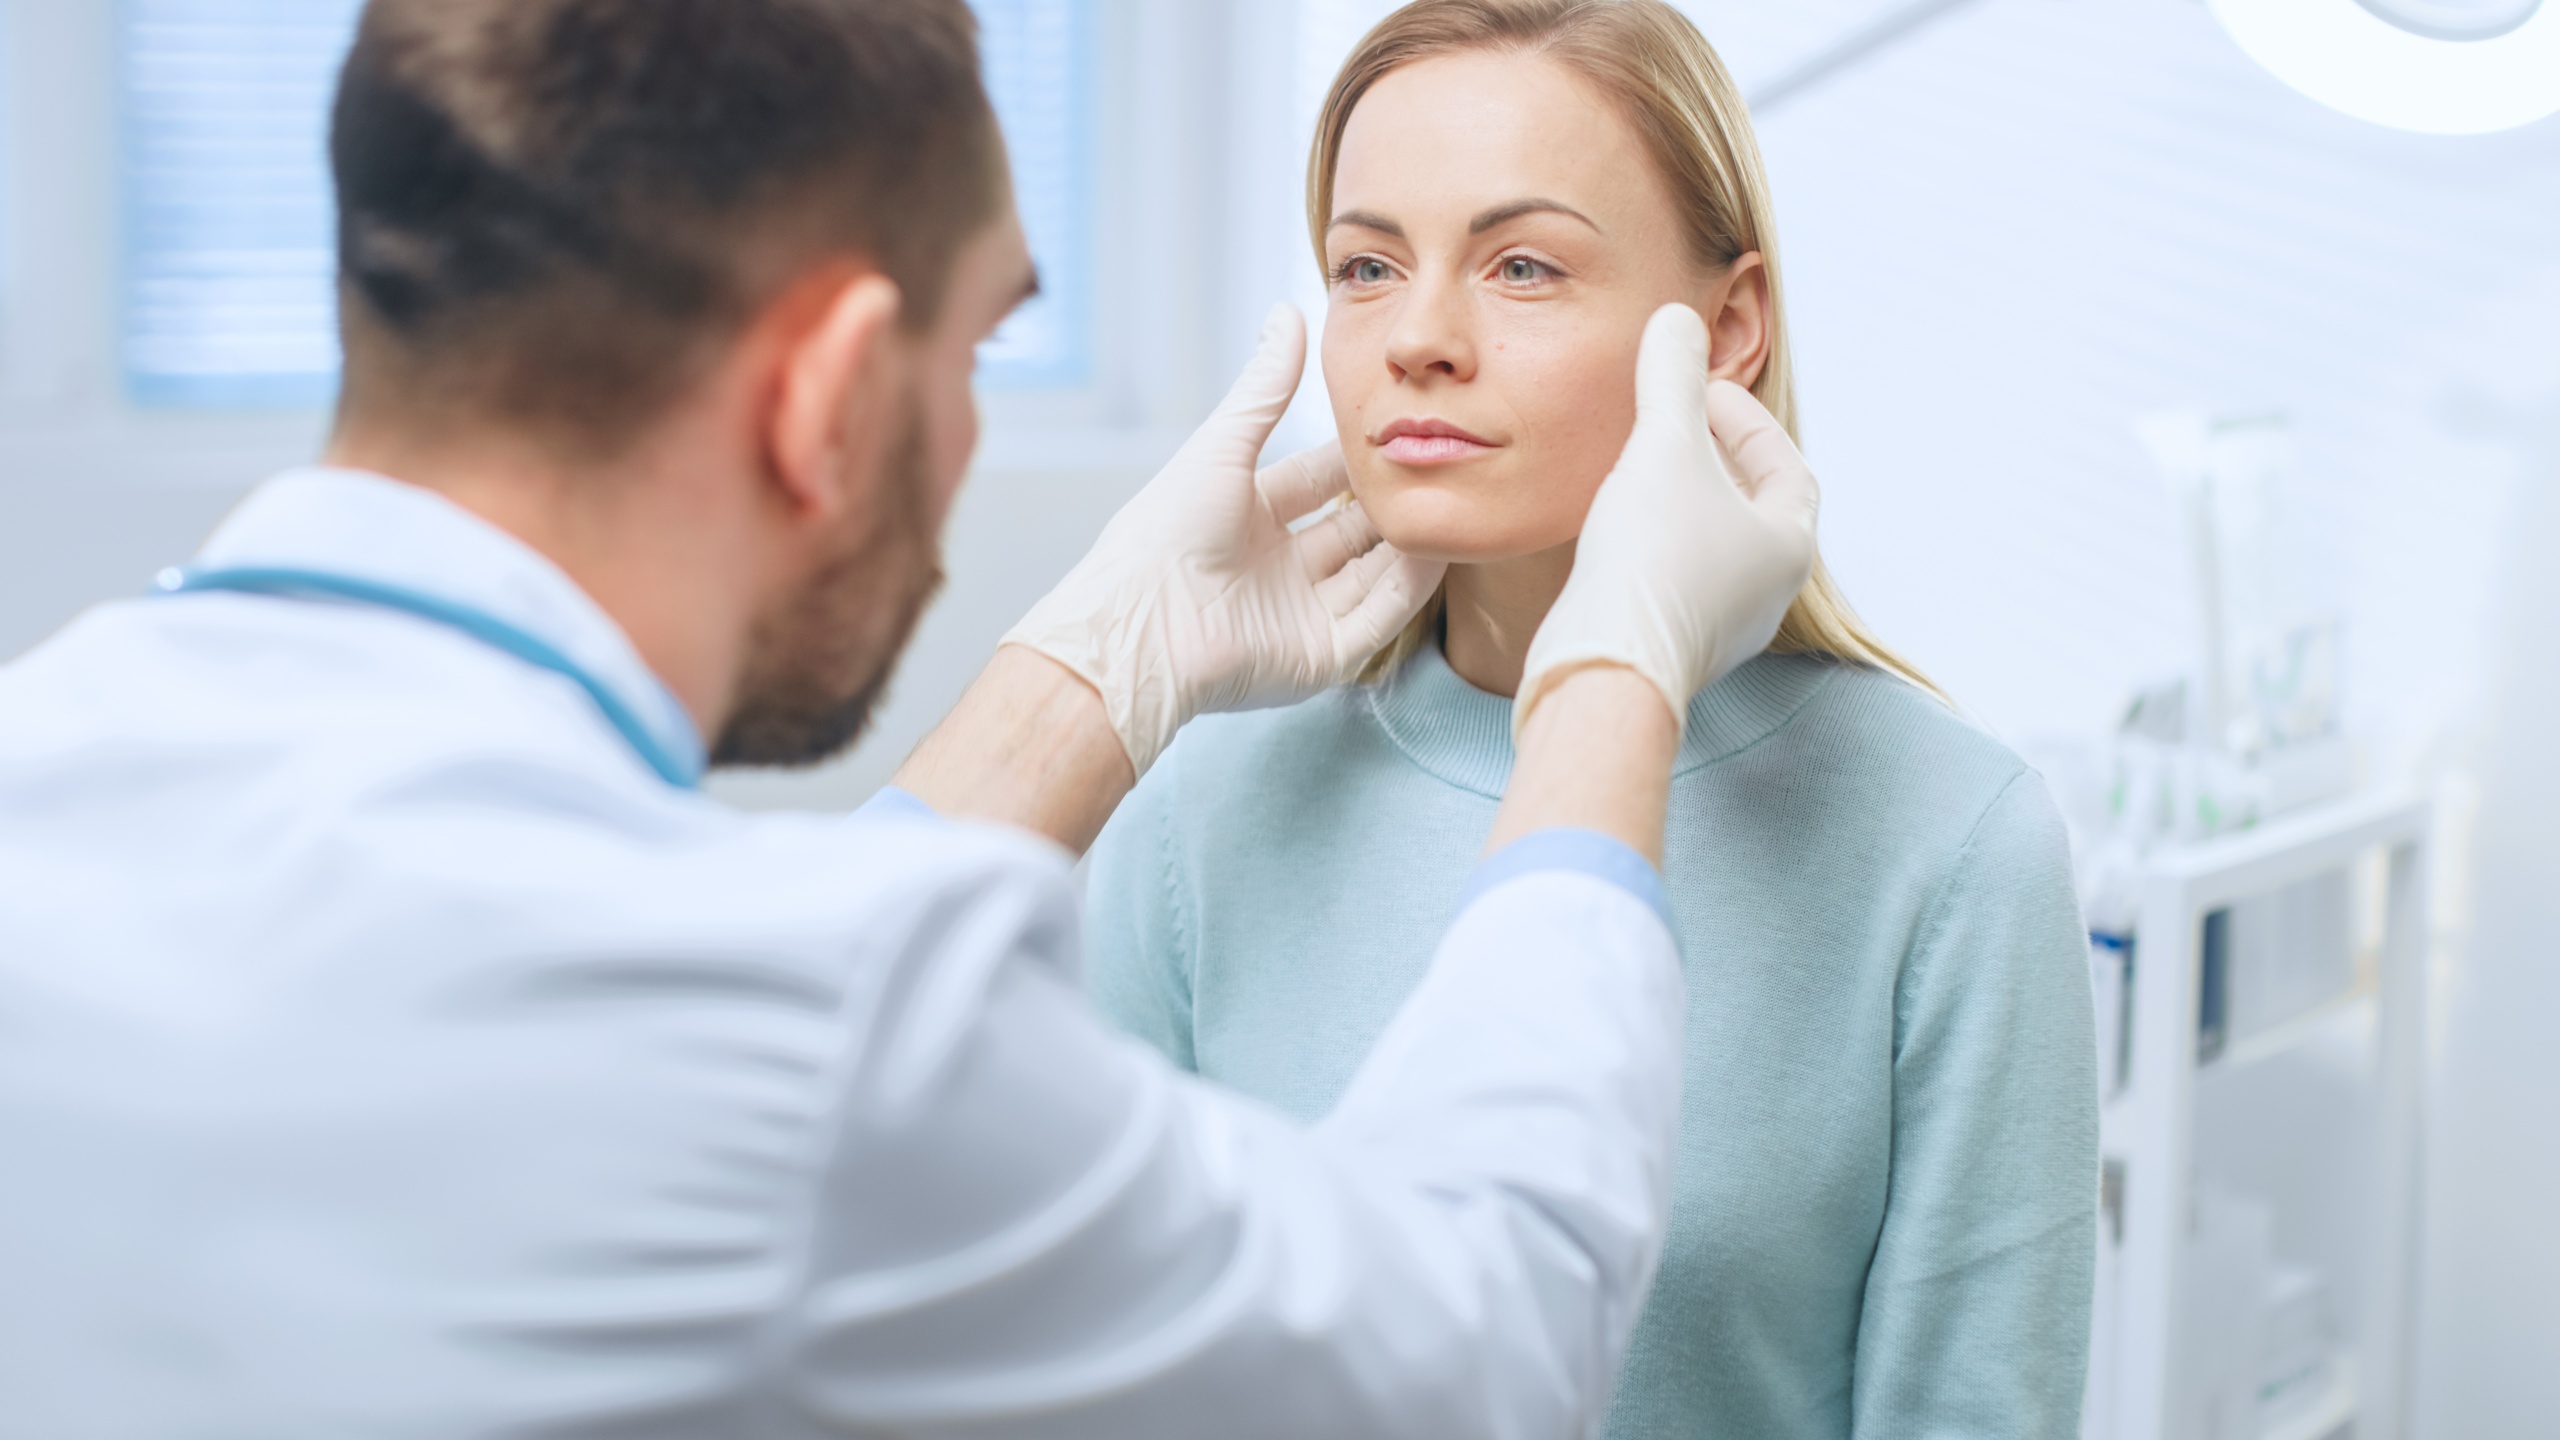 choosing a qualified cosmetic surgeon